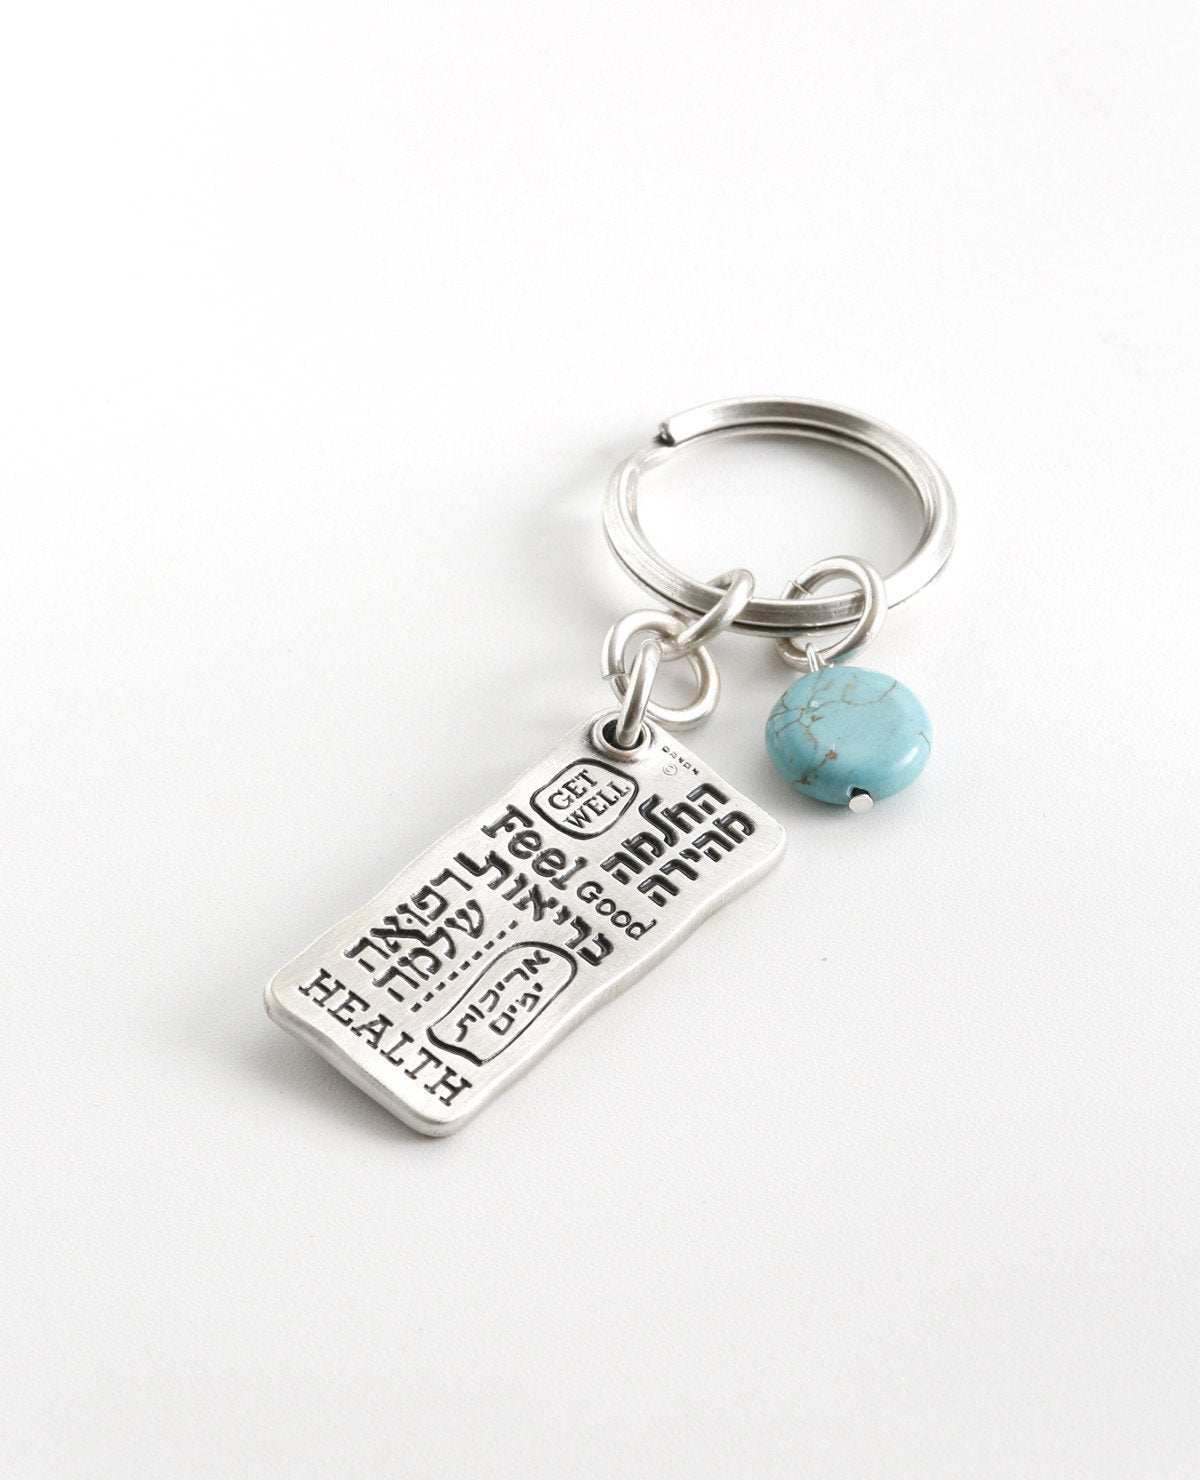 A beautiful and excitingly designed keychain, the content of which was taken from a prayer by Moses for the health of his sister, and it is in fact a prayer for good health. Shaped as a rectangular plate that has the sentence "Please, God, heal her" written in Hebrew on one side, and underneath an embossed image of a Hamsa with an eye. The other side contains blessings, in both English and Hebrew, for quick recovery, good health, and longevity. Next to the plate hangs a pretty turquoise stone. The keychain 